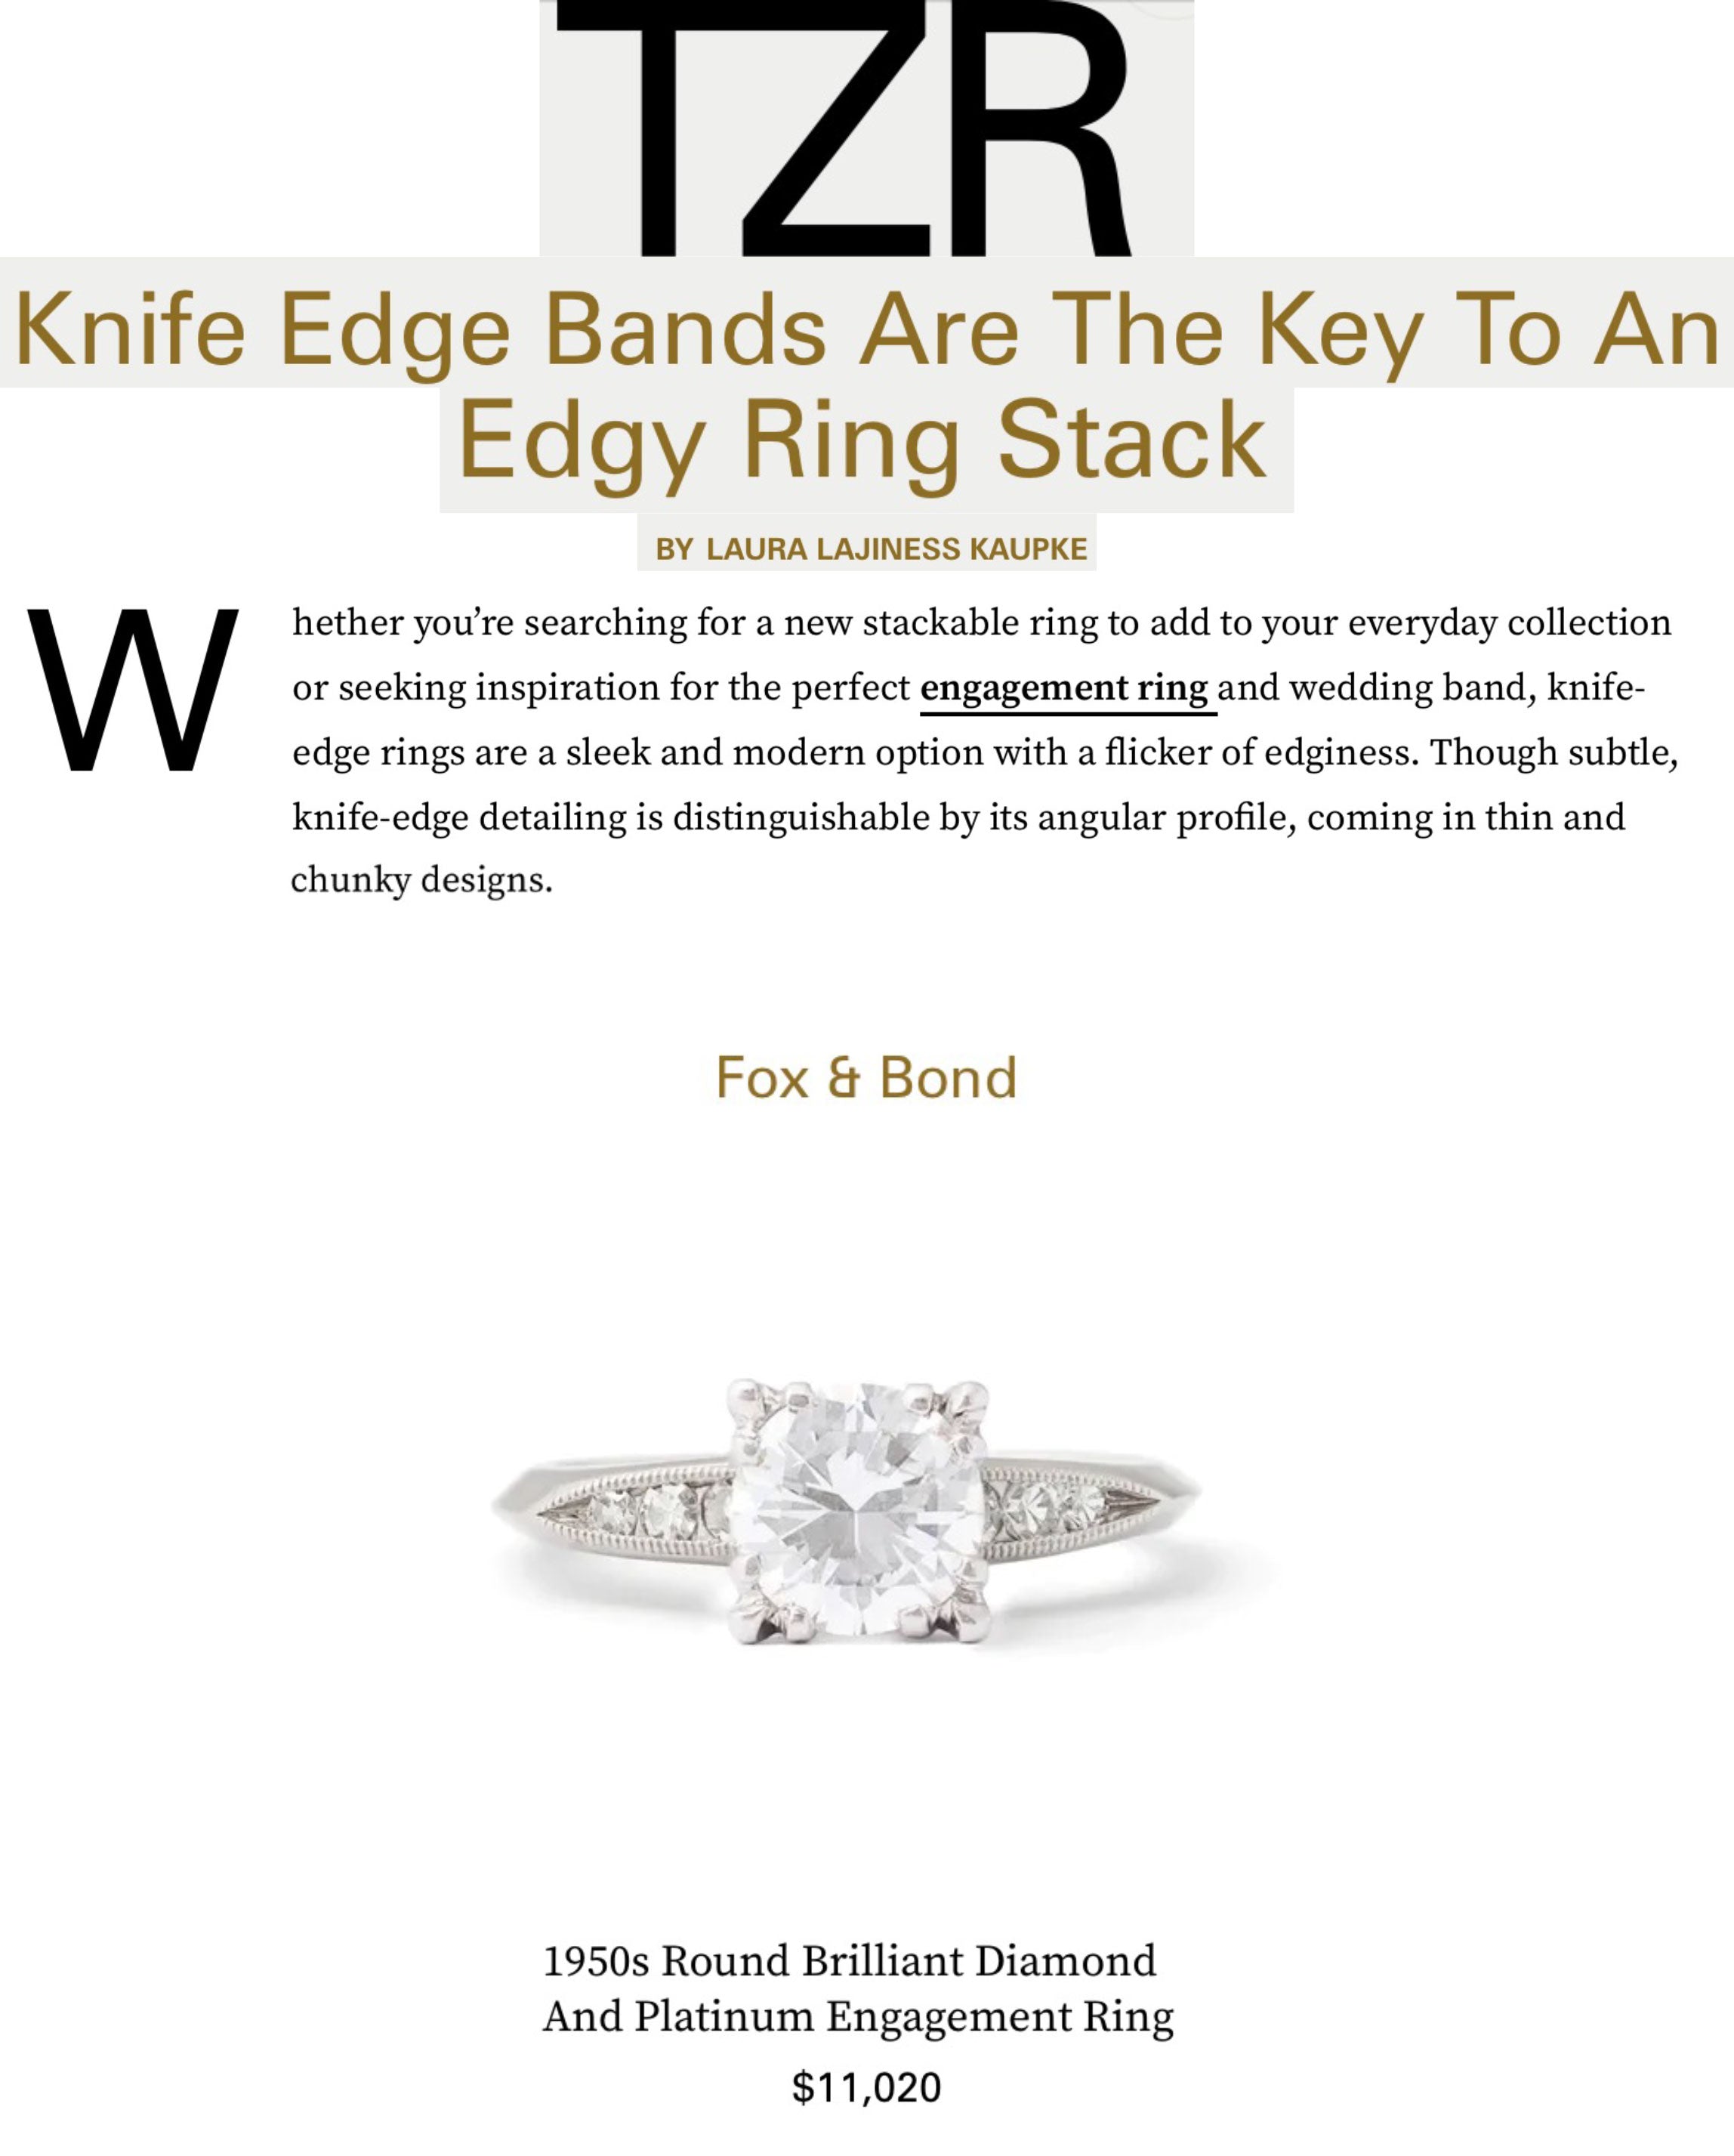 The Zoe Report: Knife Edge Bands Are The Key To An Edgy Ring Stack